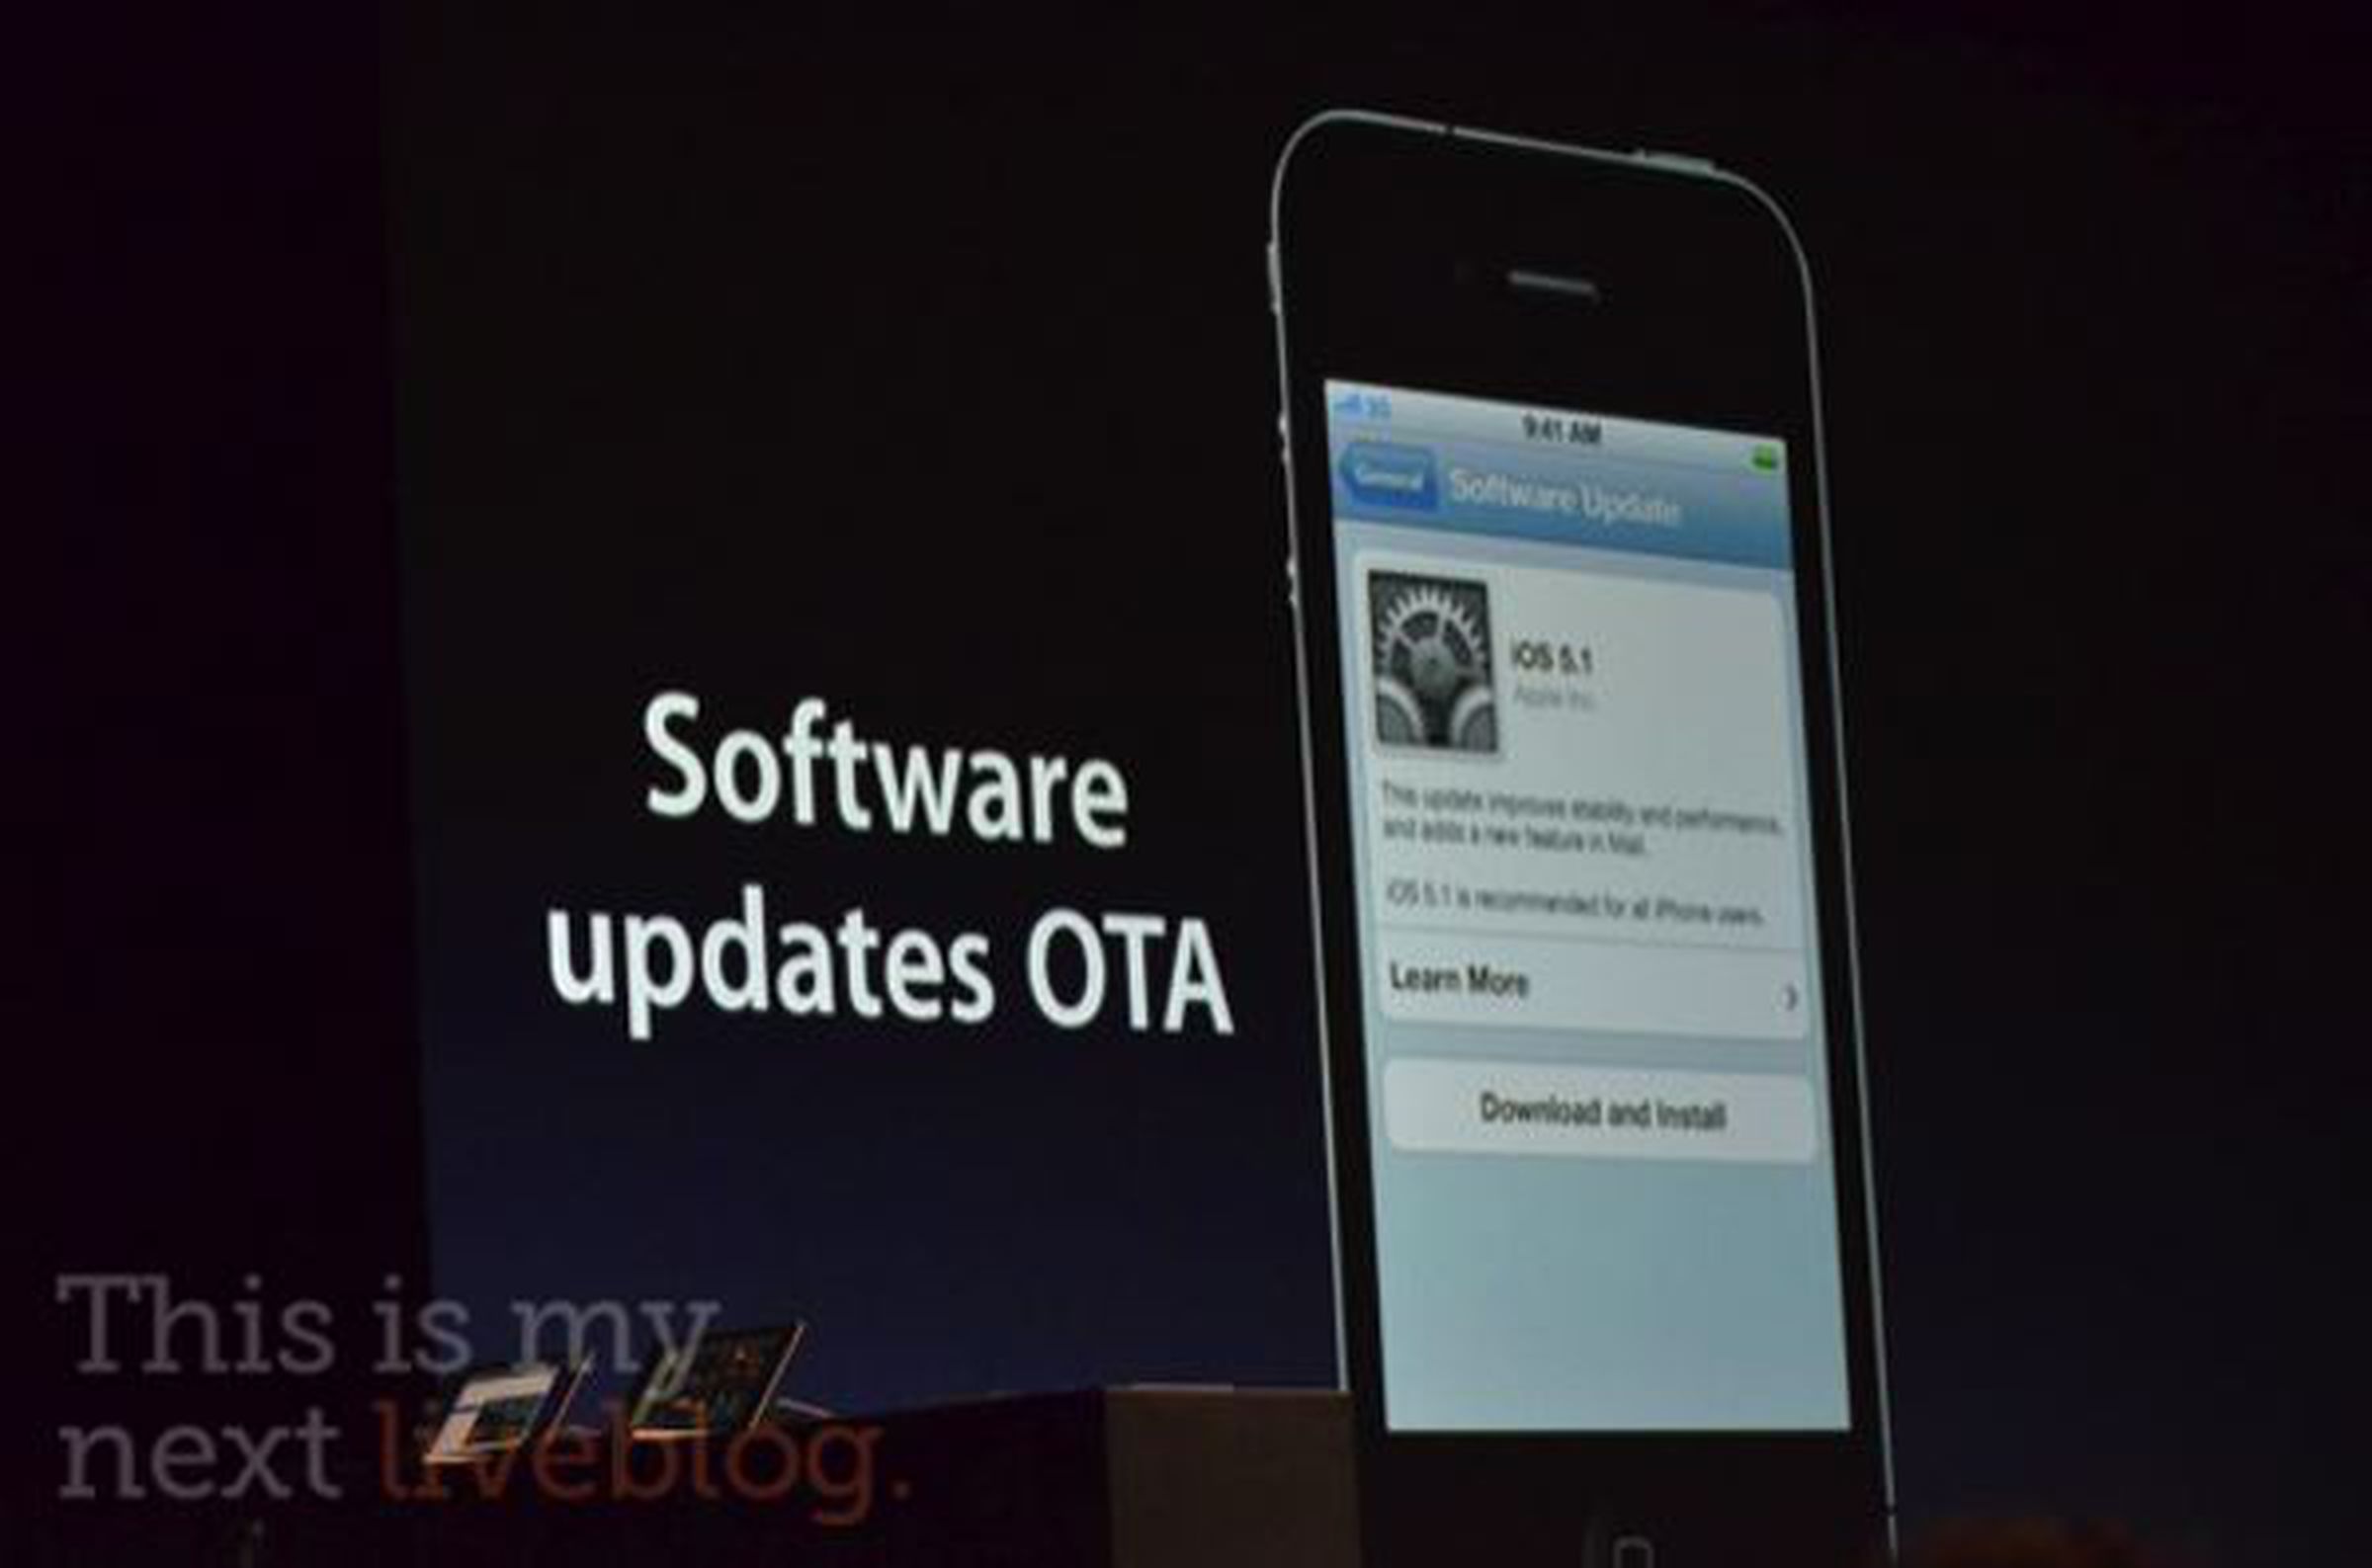 iOS 5 announced: iMessage, Notification Center, and more; comes today for devs, this fall for everyone else